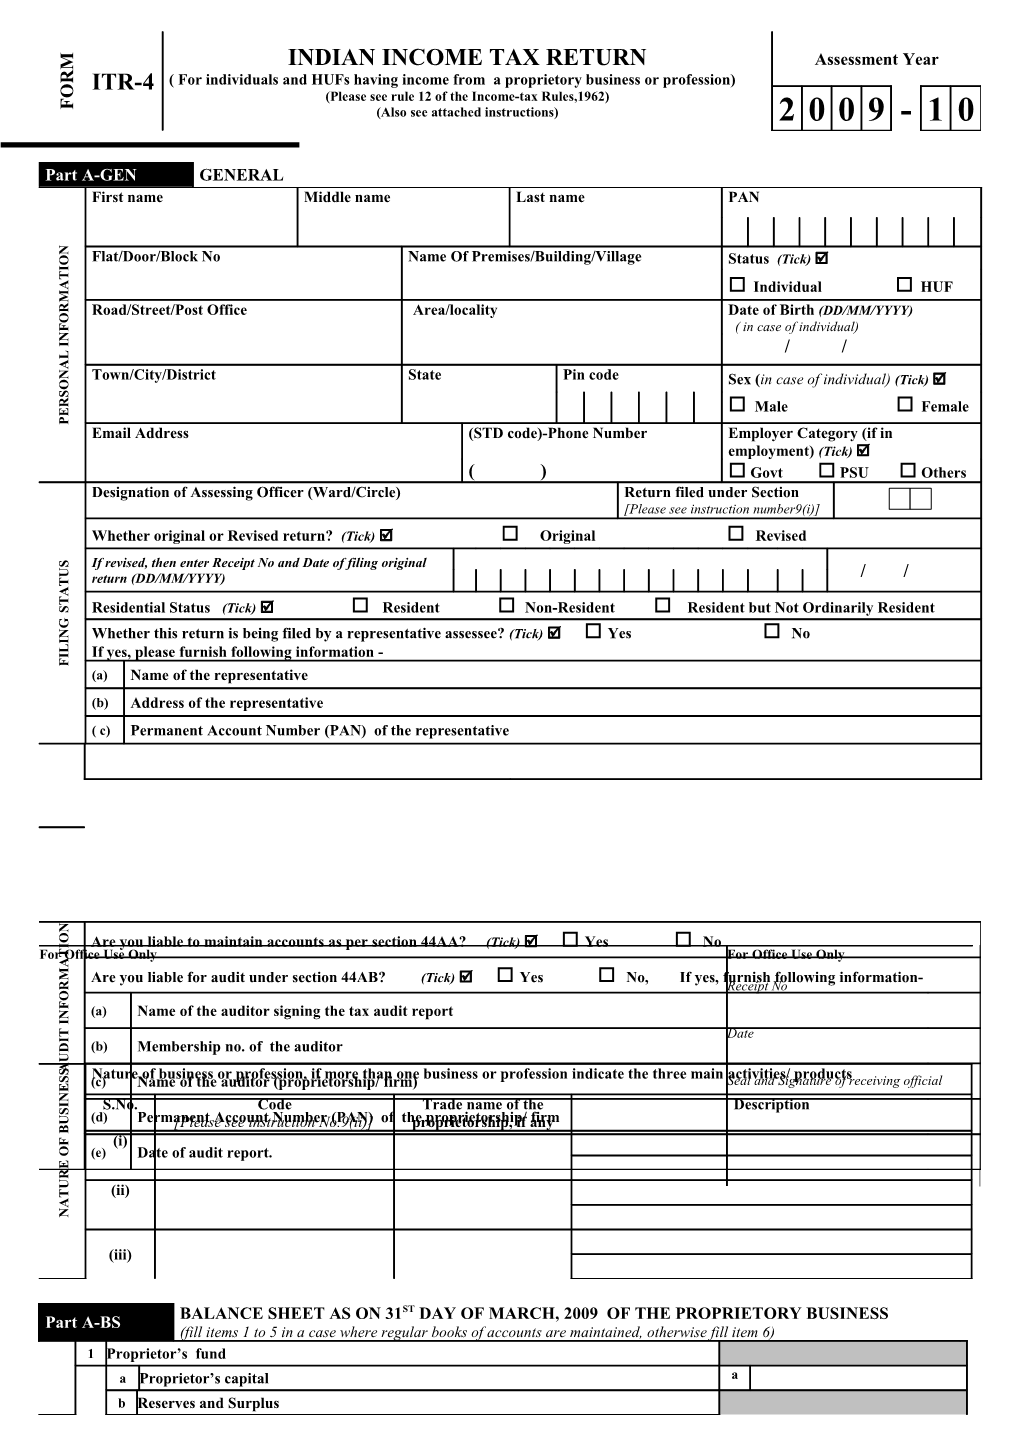 Instructions for Filling out FORM ITR-4